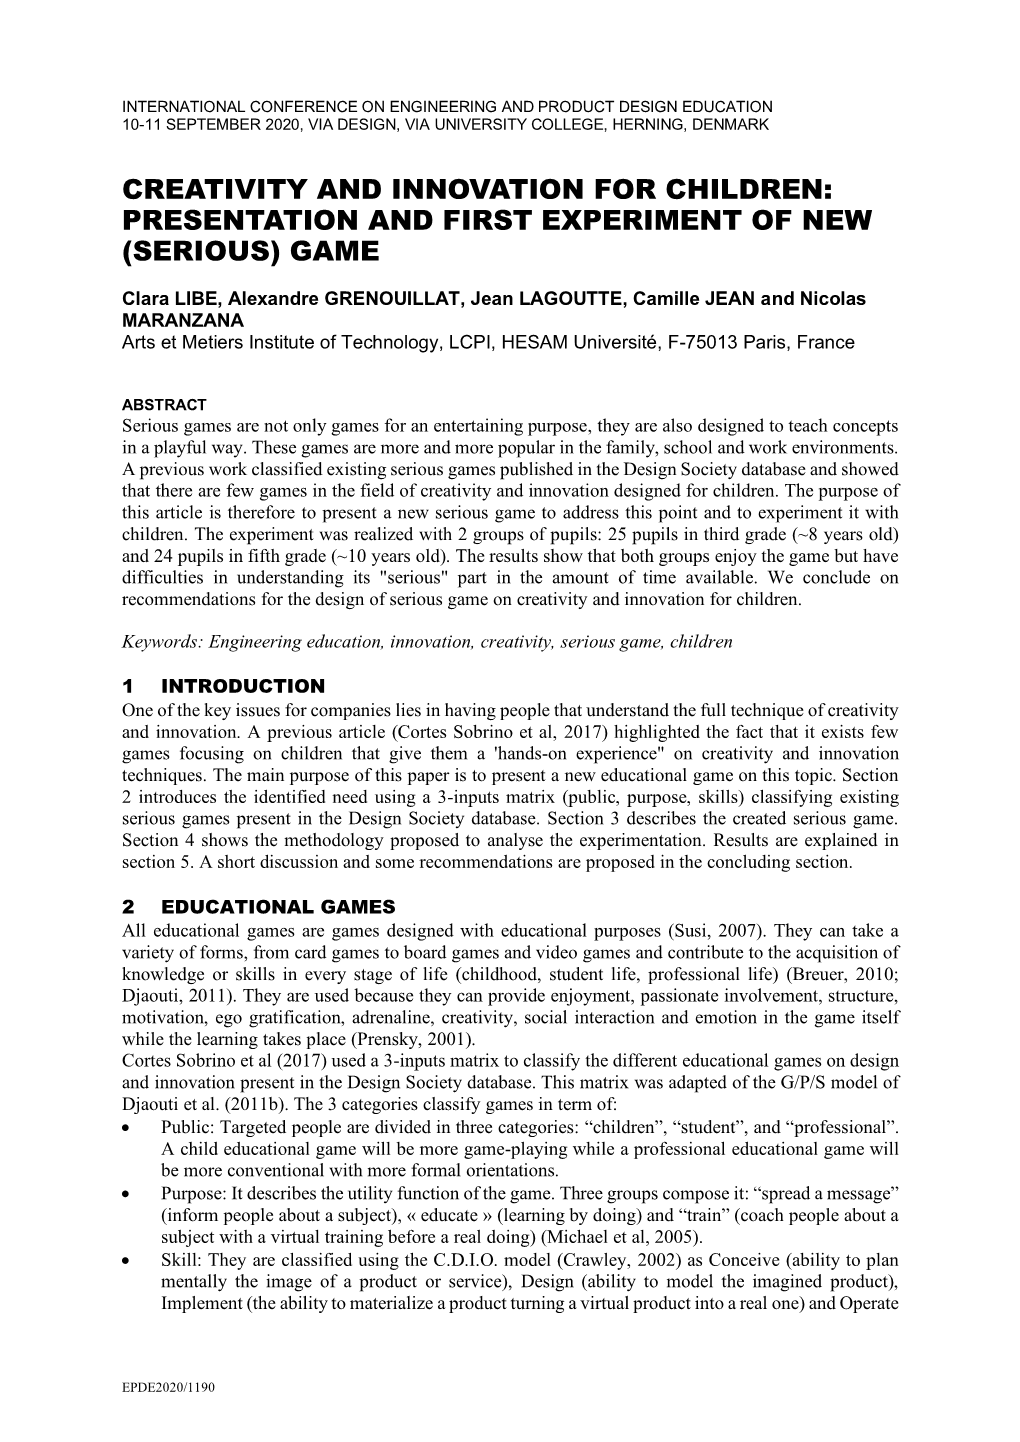 Creativity and Innovation for Children: Presentation and First Experiment of New (Serious) Game